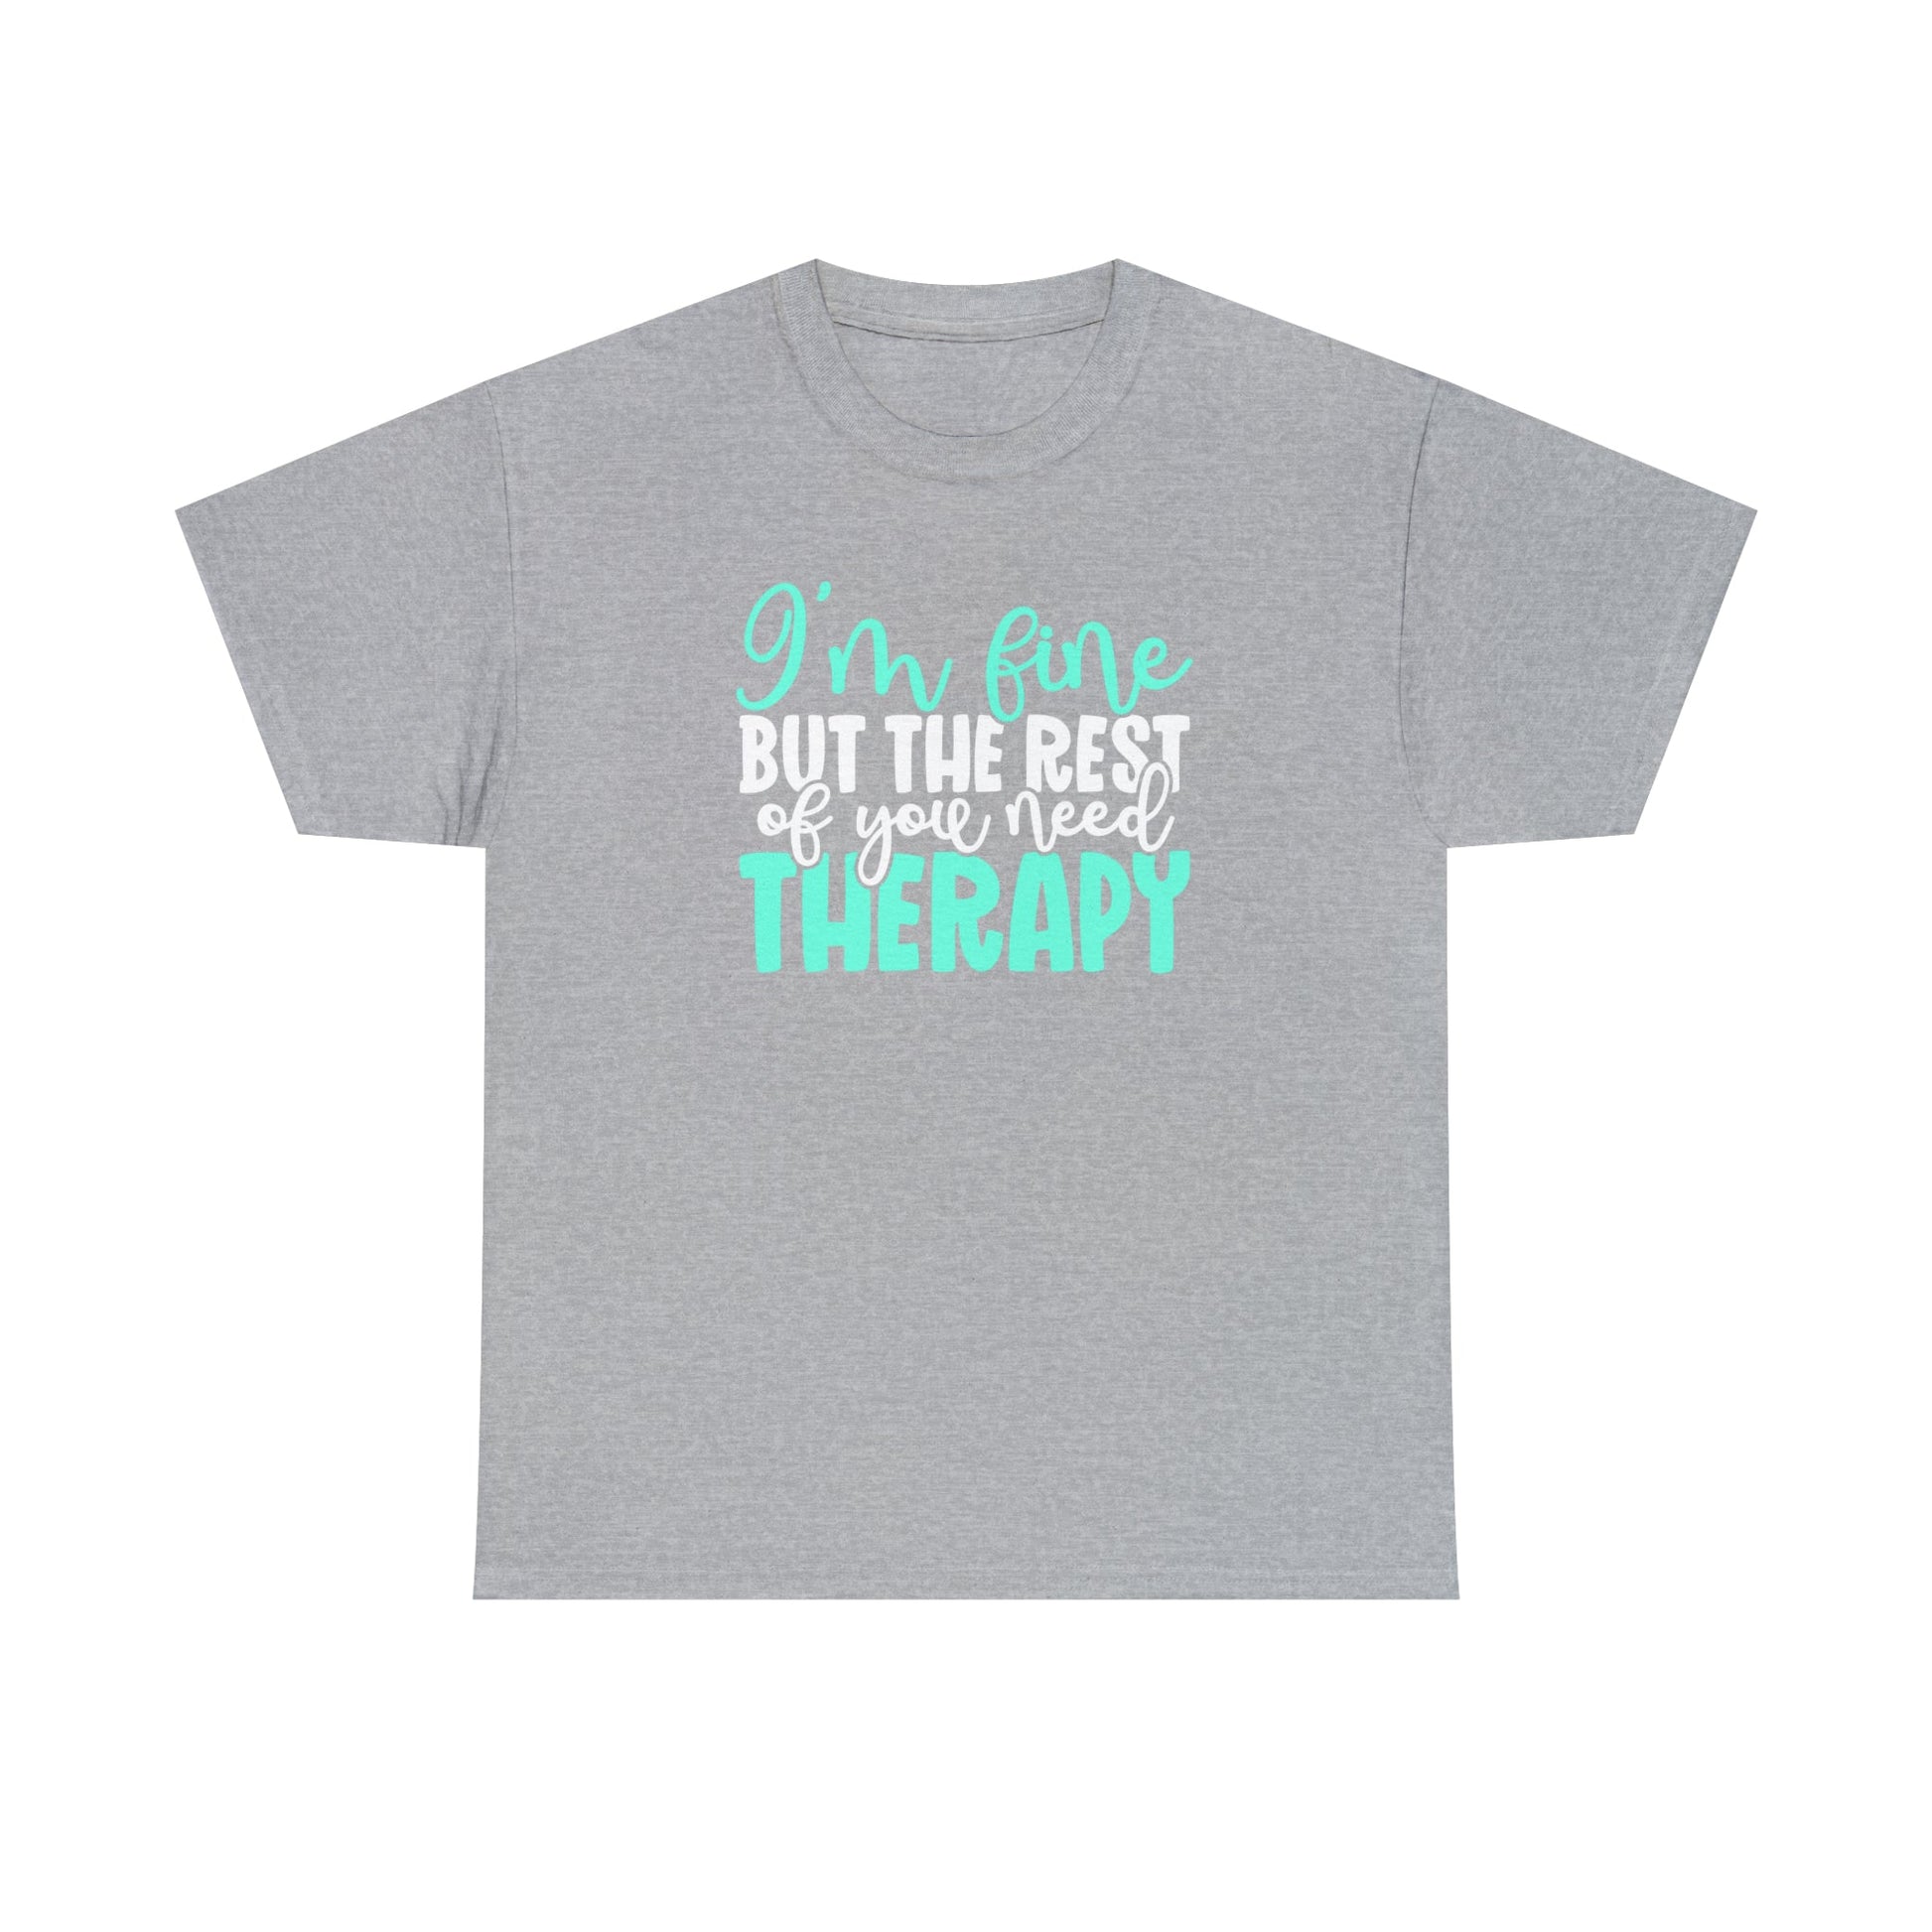 CrazyYetiClothing, CYC, Y'all Need Therapy (Unisex Tee), T-Shirt